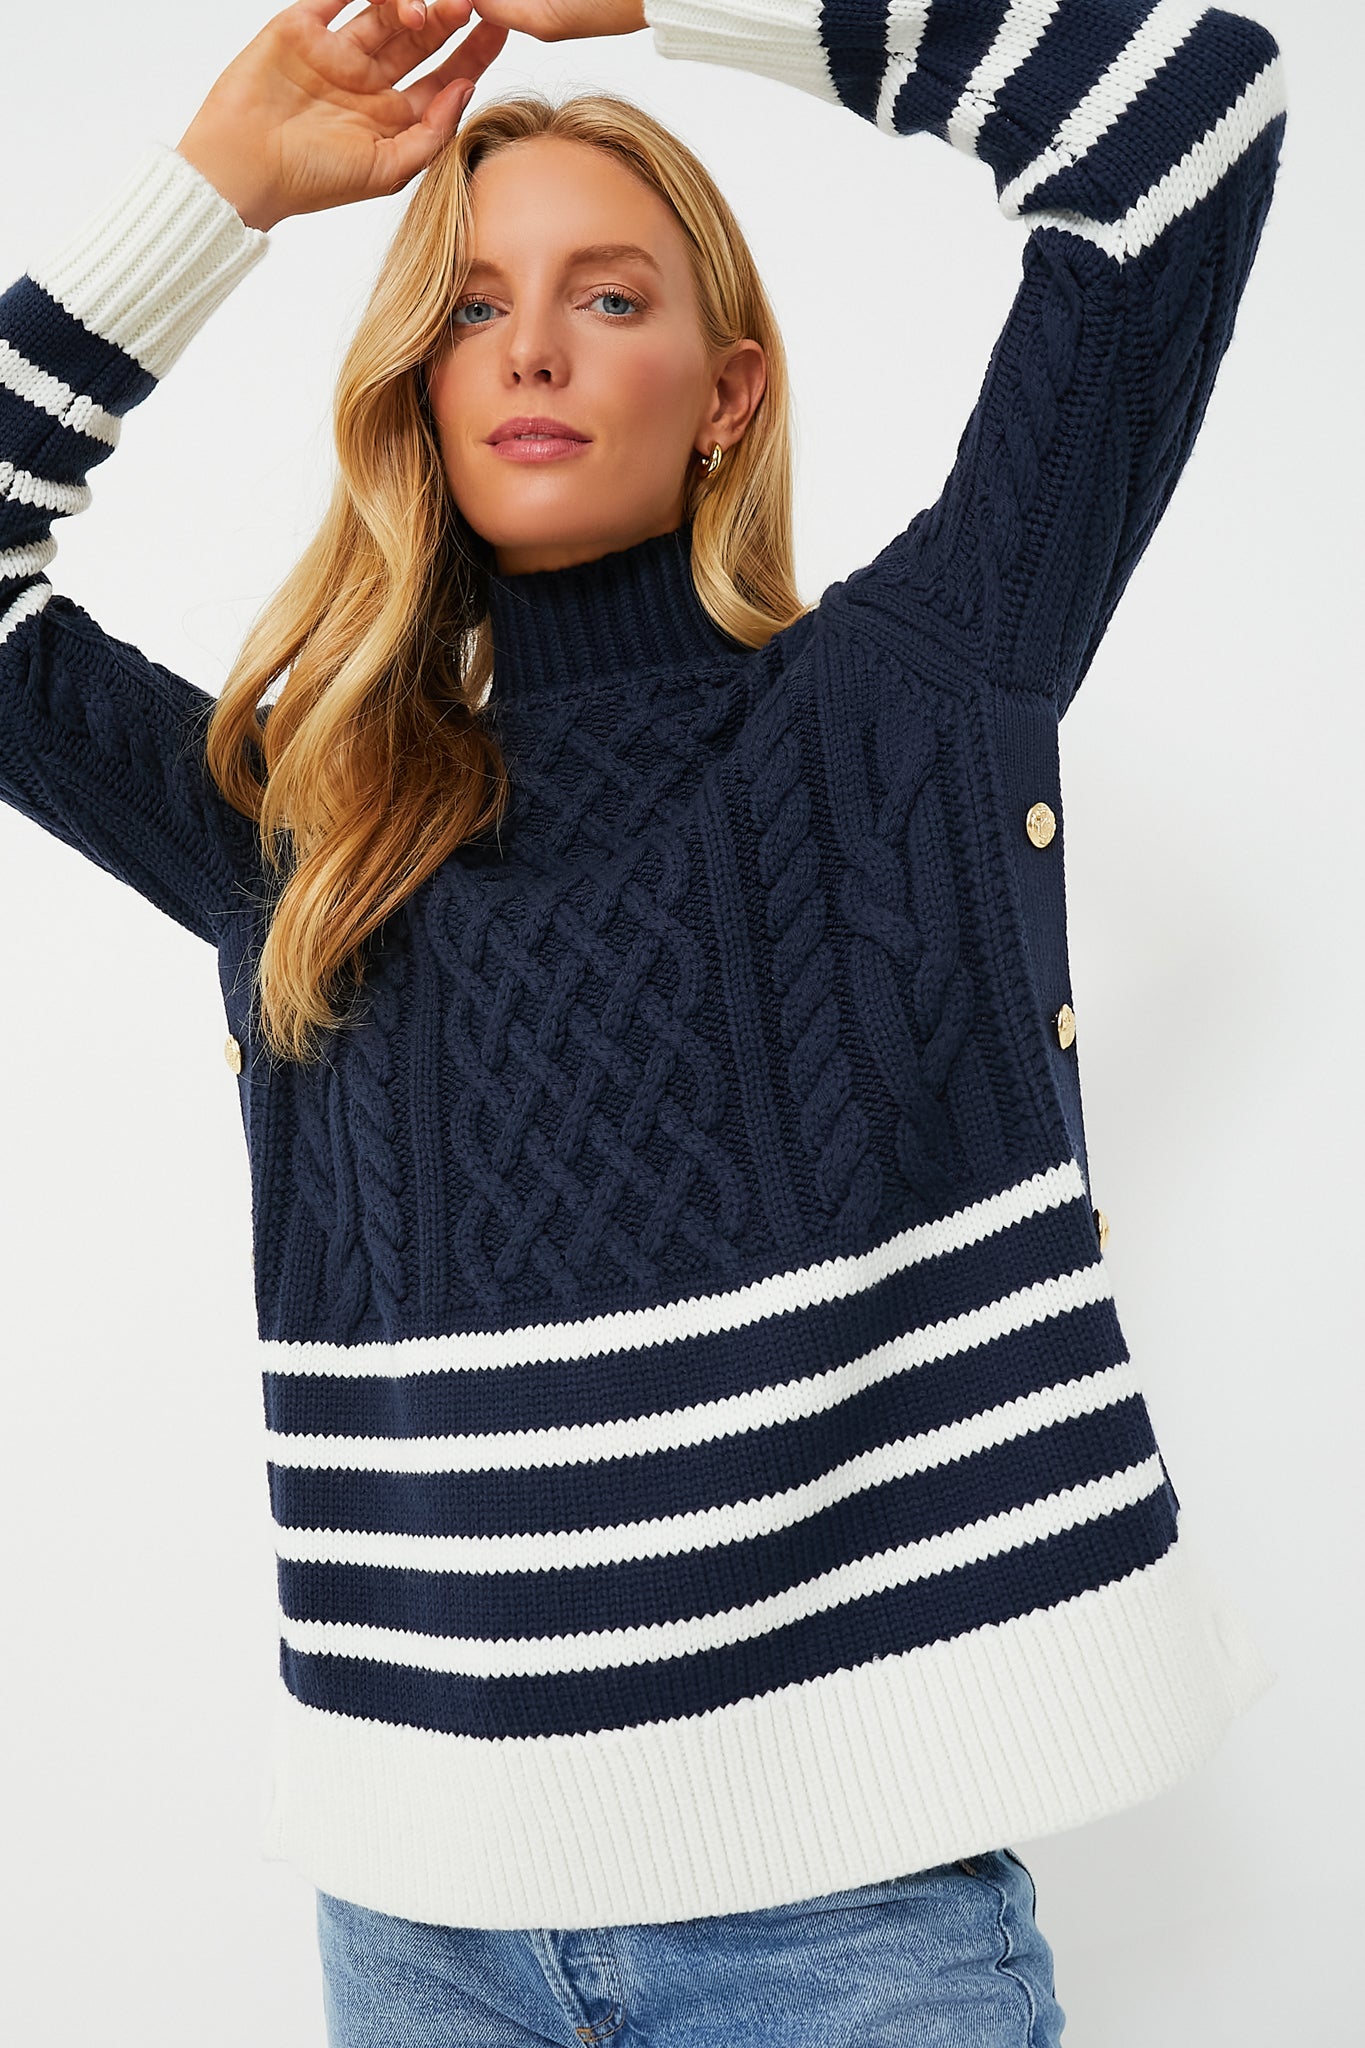 Knot Standard Royal Blue Cable Knit Sweater by Knot Standard